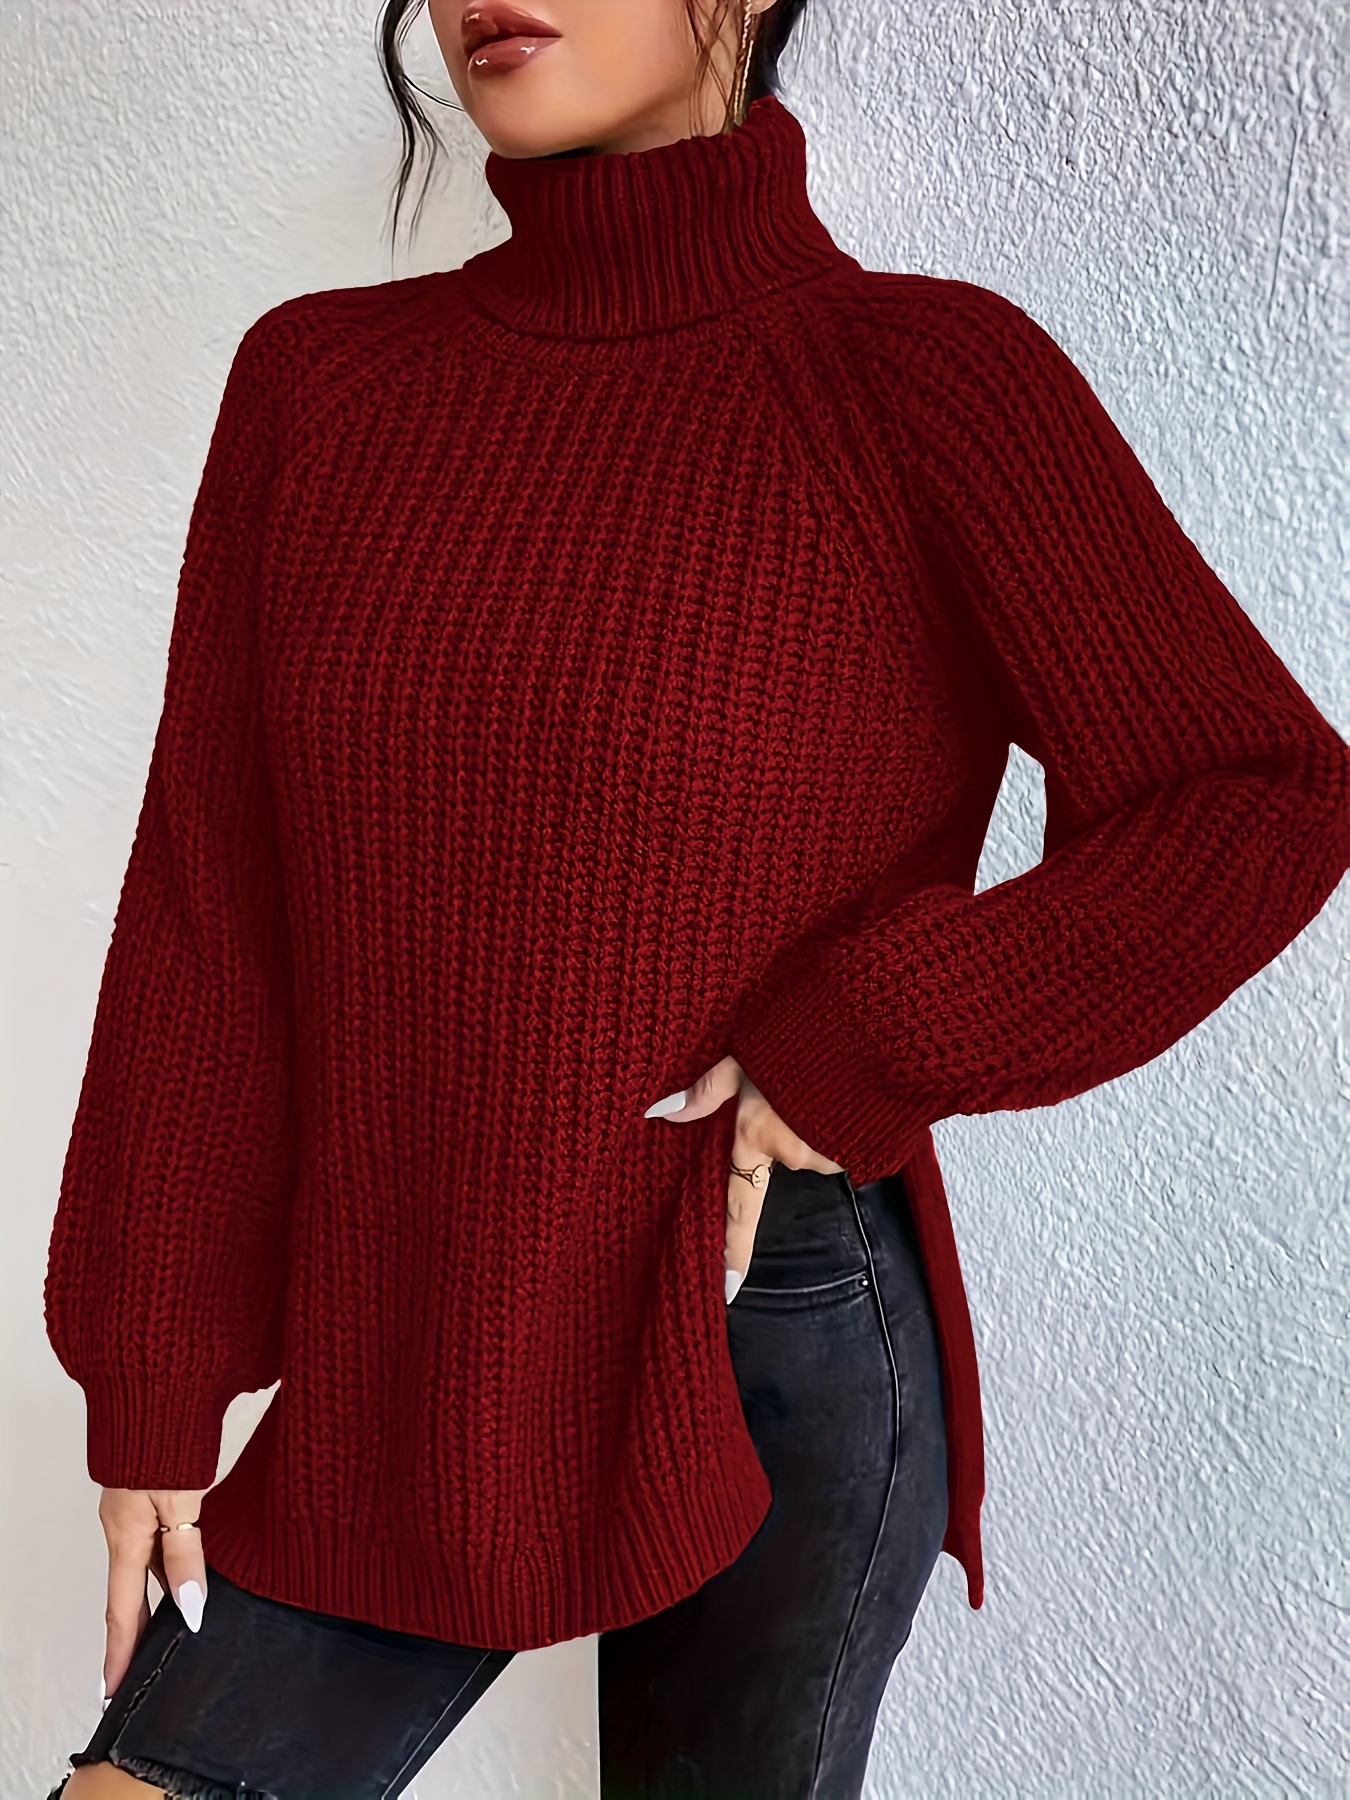 MKIUHNJ Turtleneck Pullover Women's Red Fashion Solid Colour